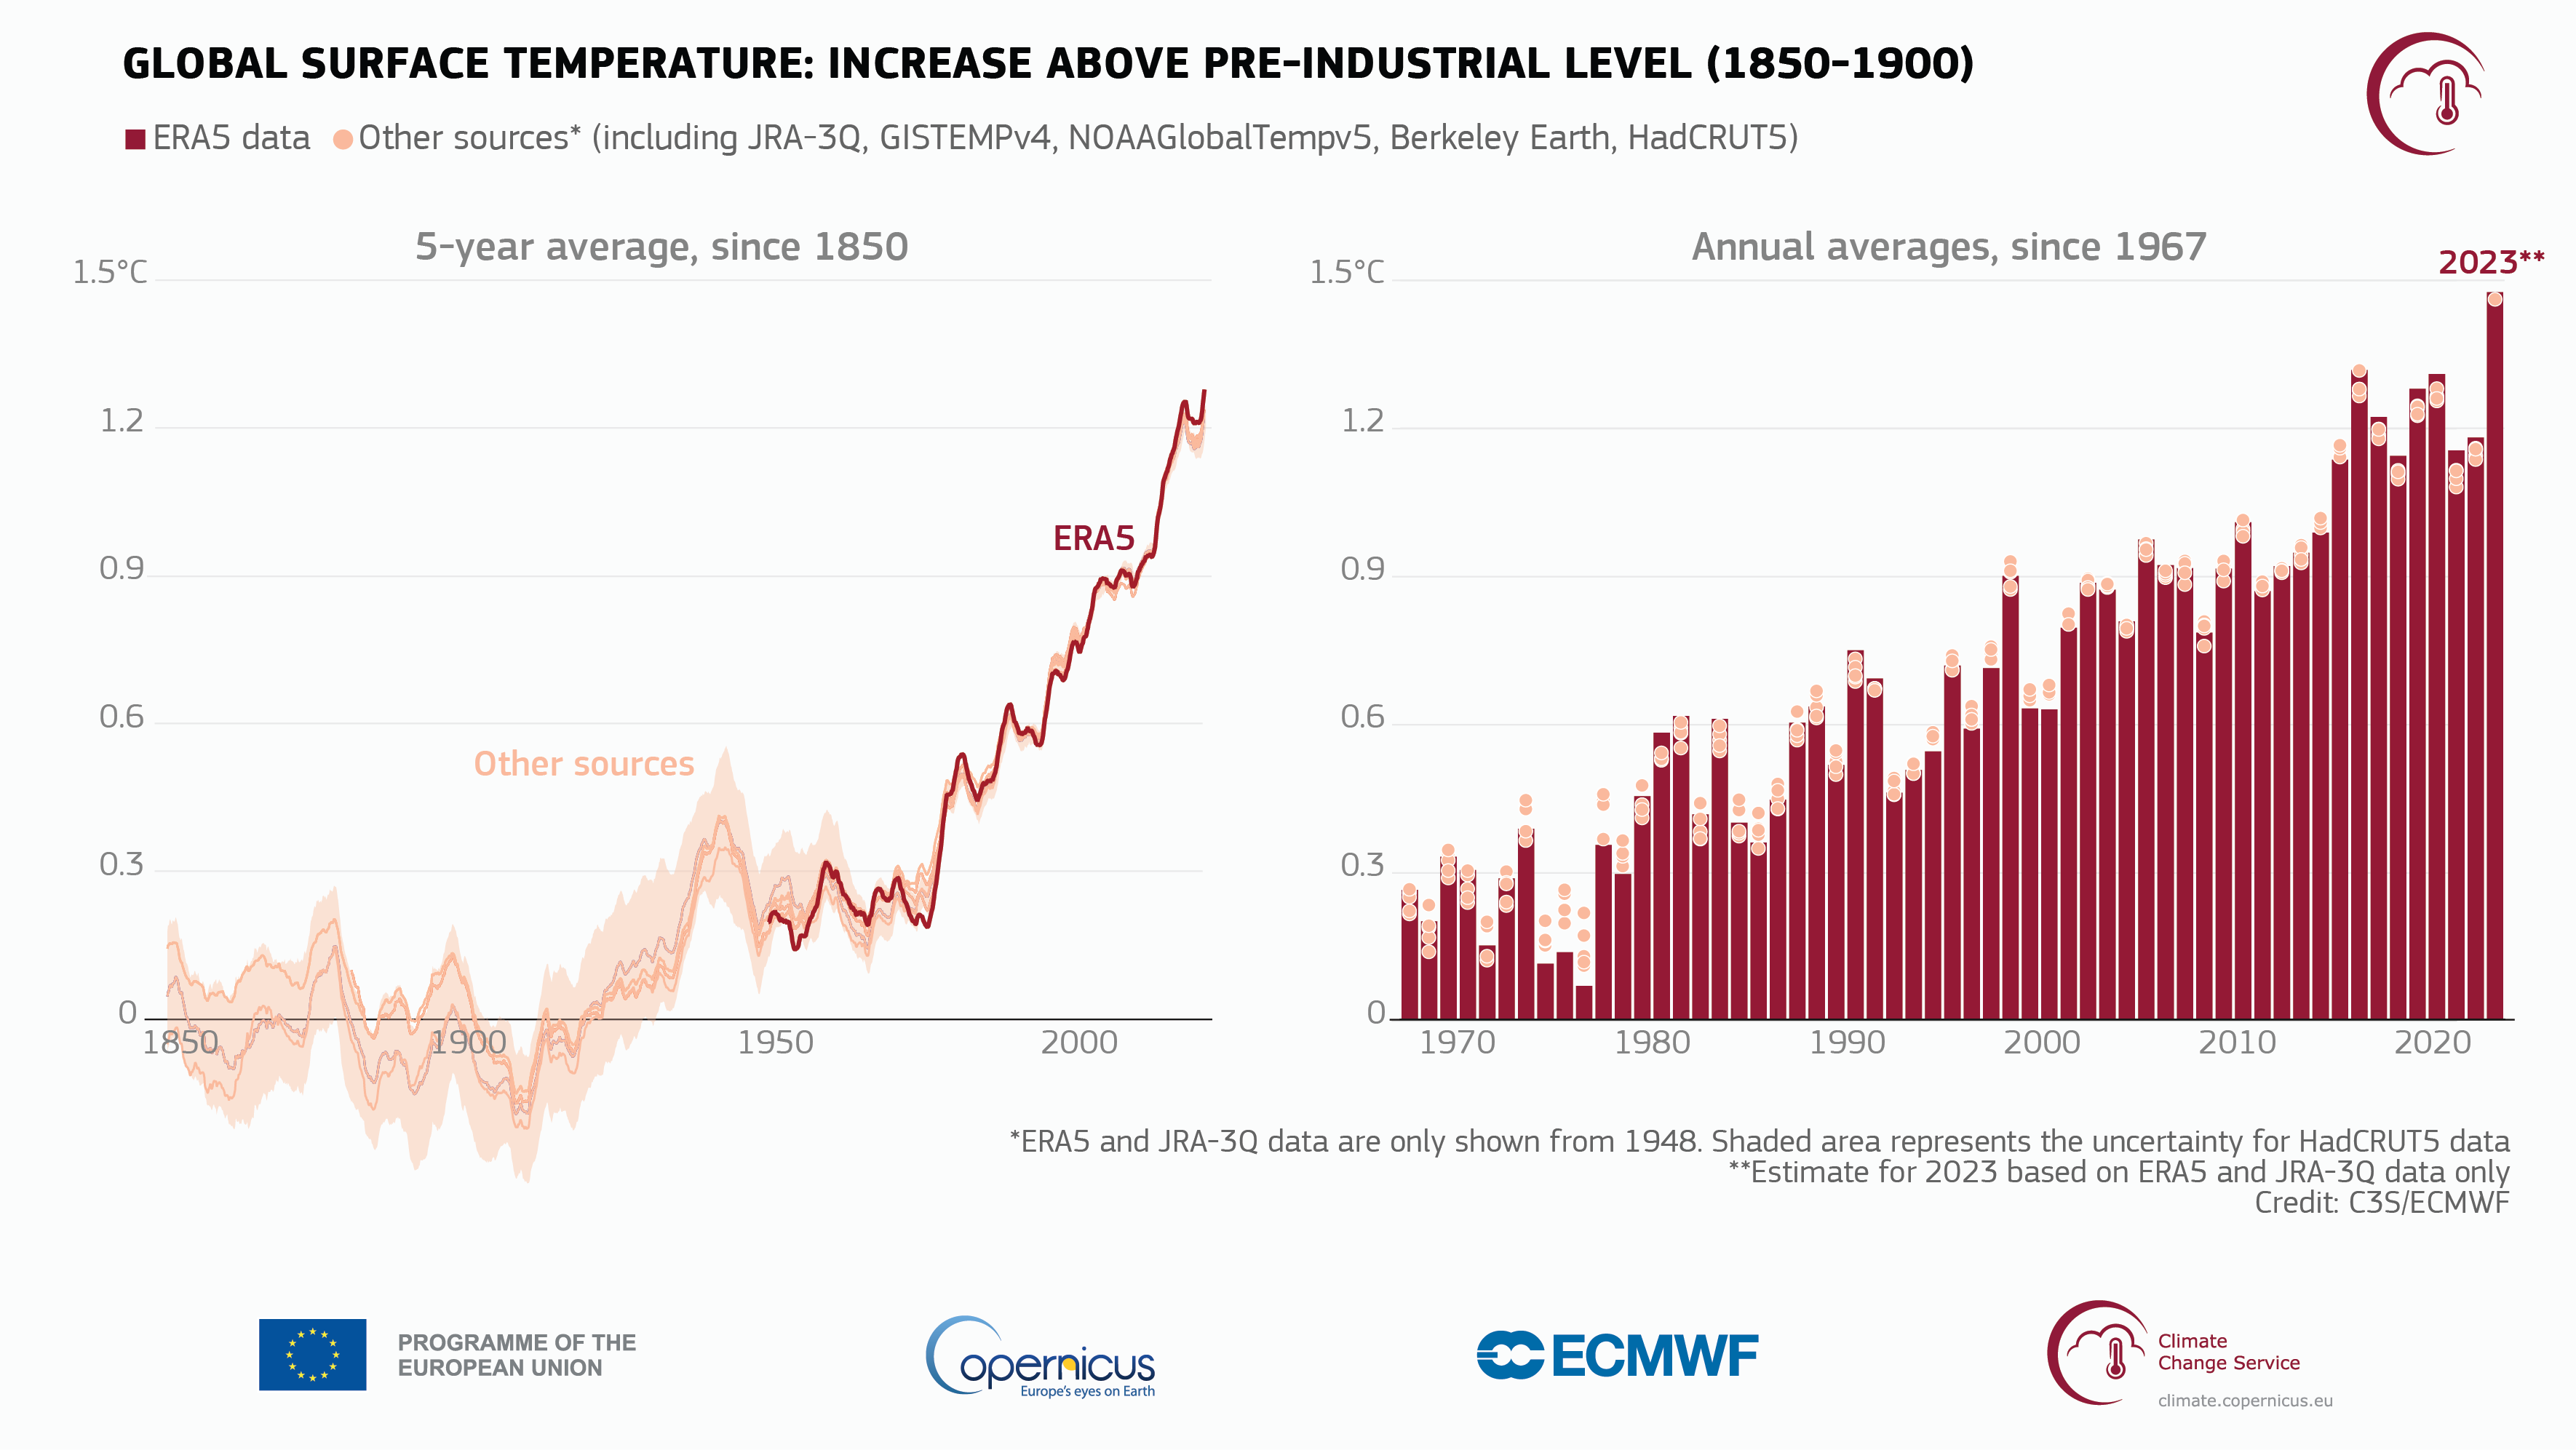 Global surface air temperature increase relative to the average for 1850-1900, the designated pre-industrial reference period, based on several global temperature datasets shown as 5-year averages since 1850 (left) and as annual averages since 1967 (right). Credit: C3S/ECMWF.  